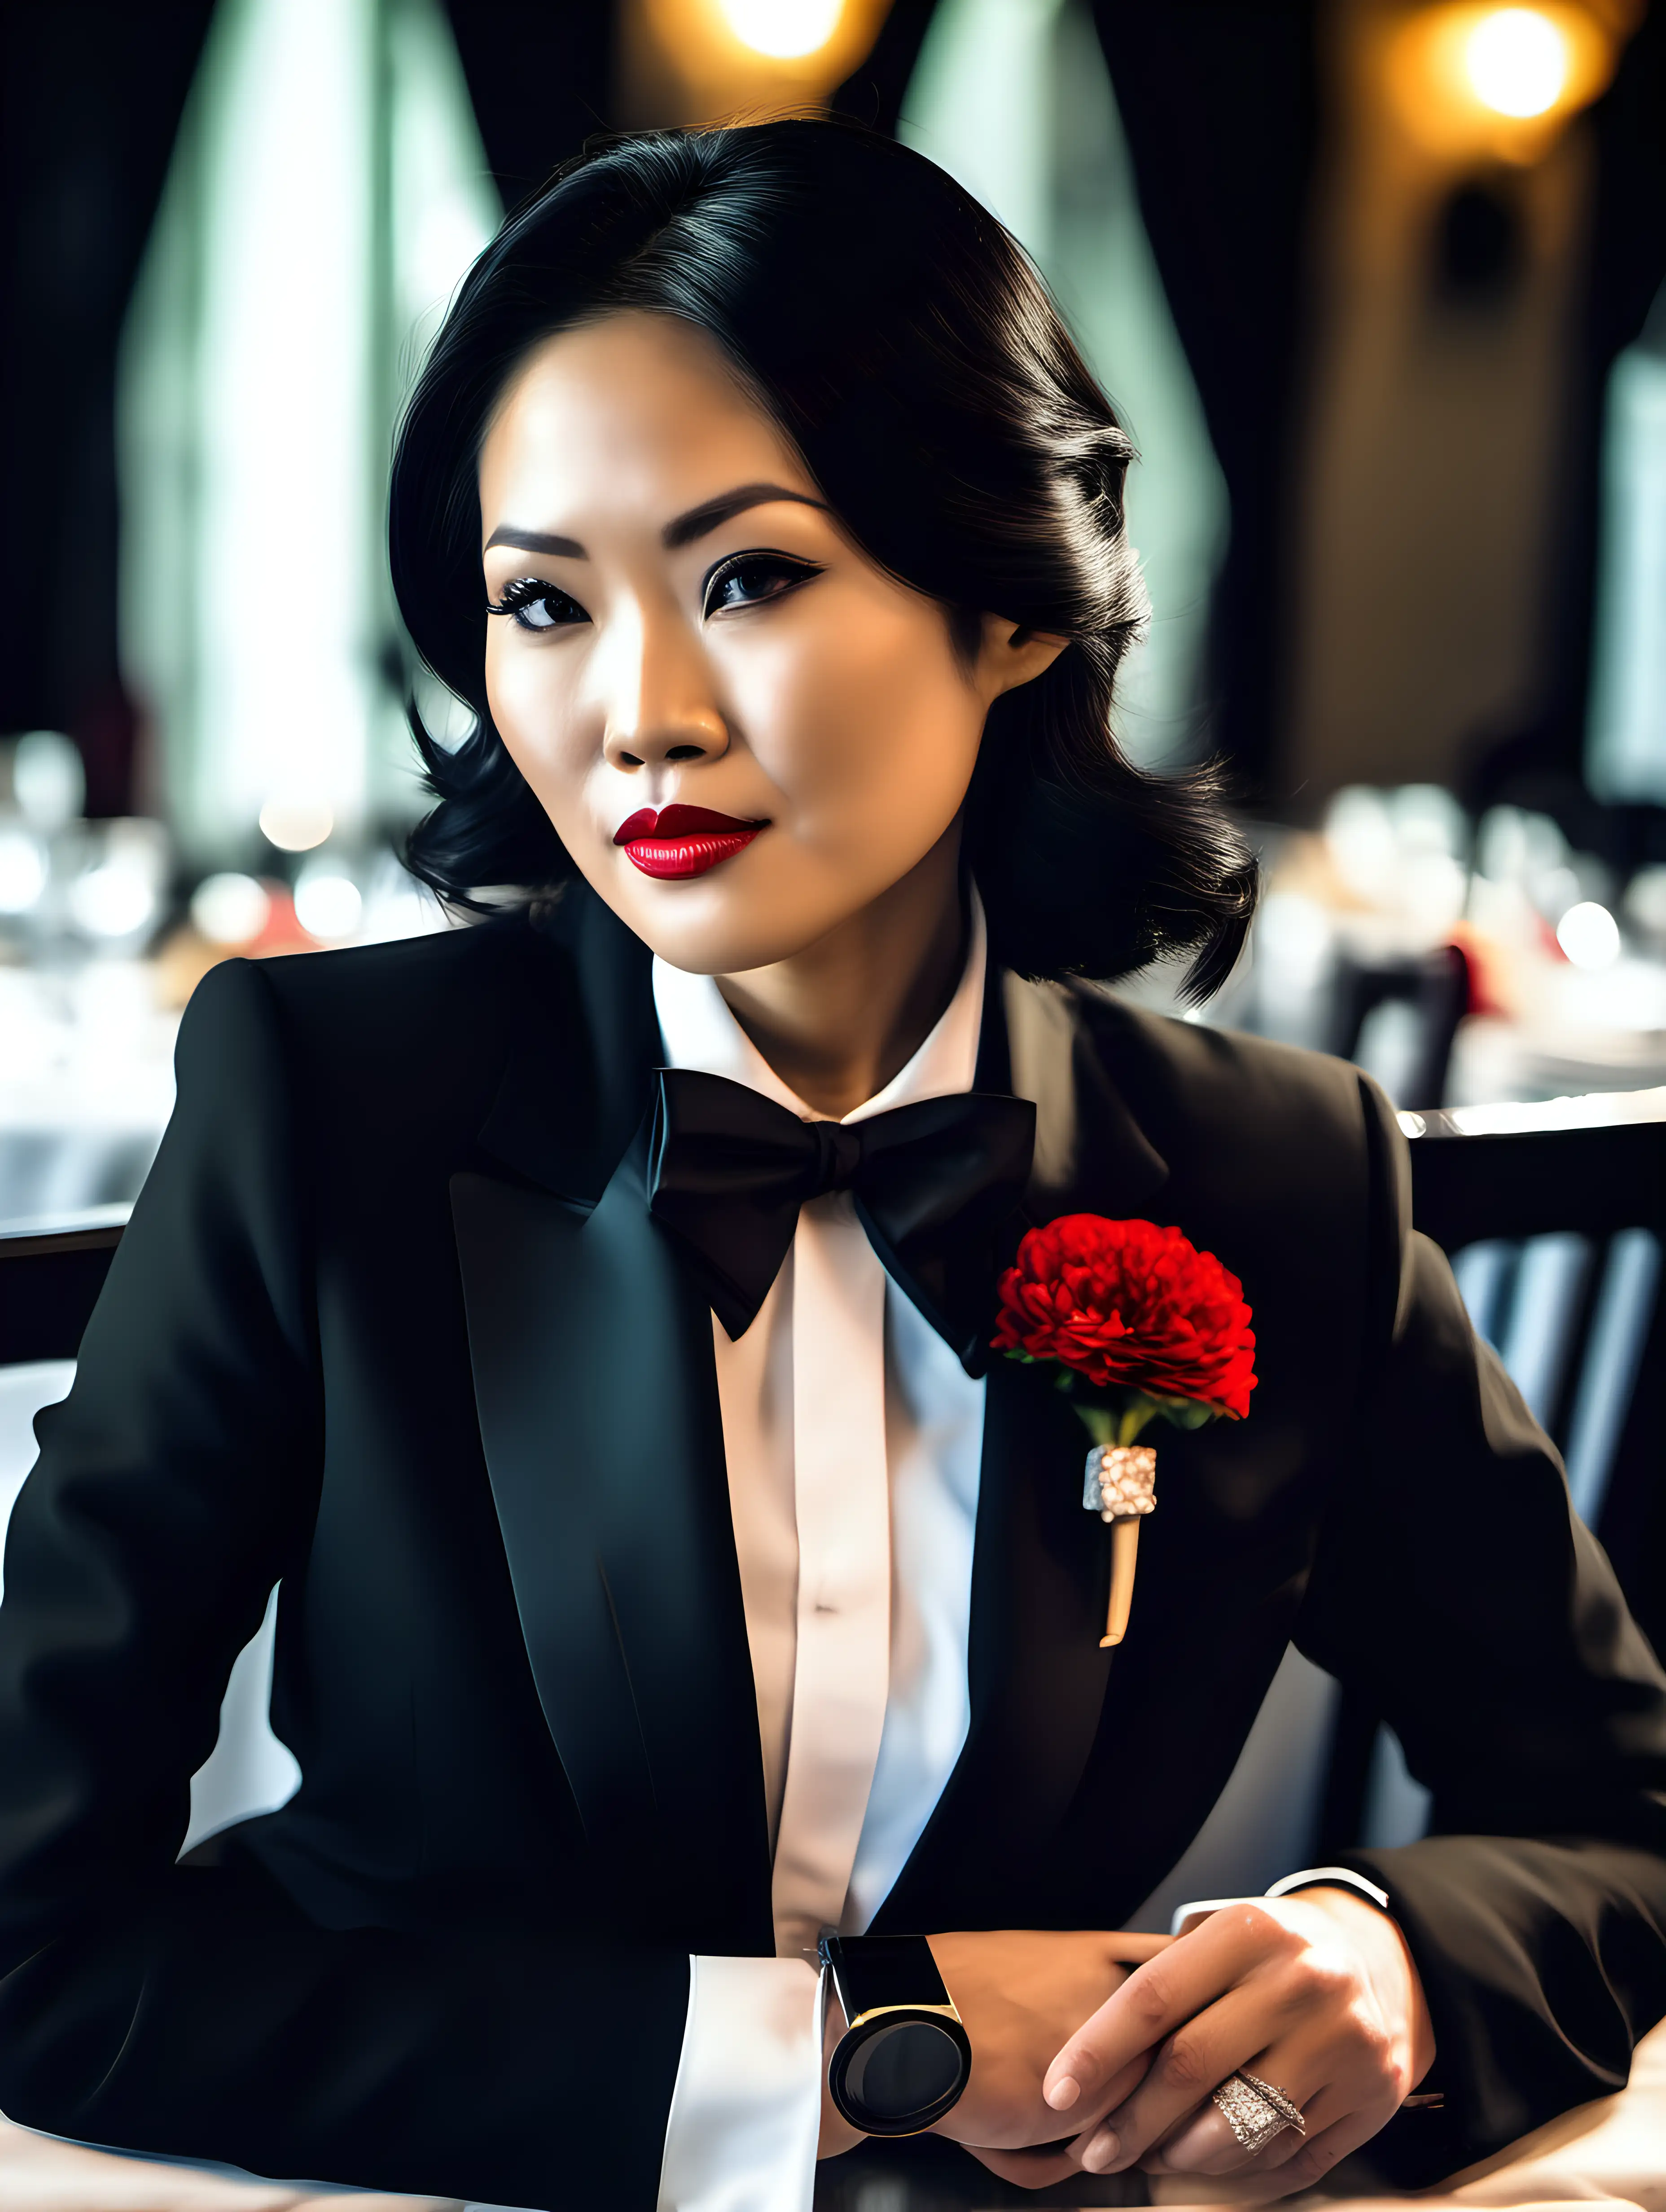 30 year old gorgeous and slightly smiling vietnamese woman with black shoulder length hair and red lipstick wearing a formal tuxedo with a black bow tie and big black cufflinks. Her jacket has a corsage. She is sitting at a dinner table.